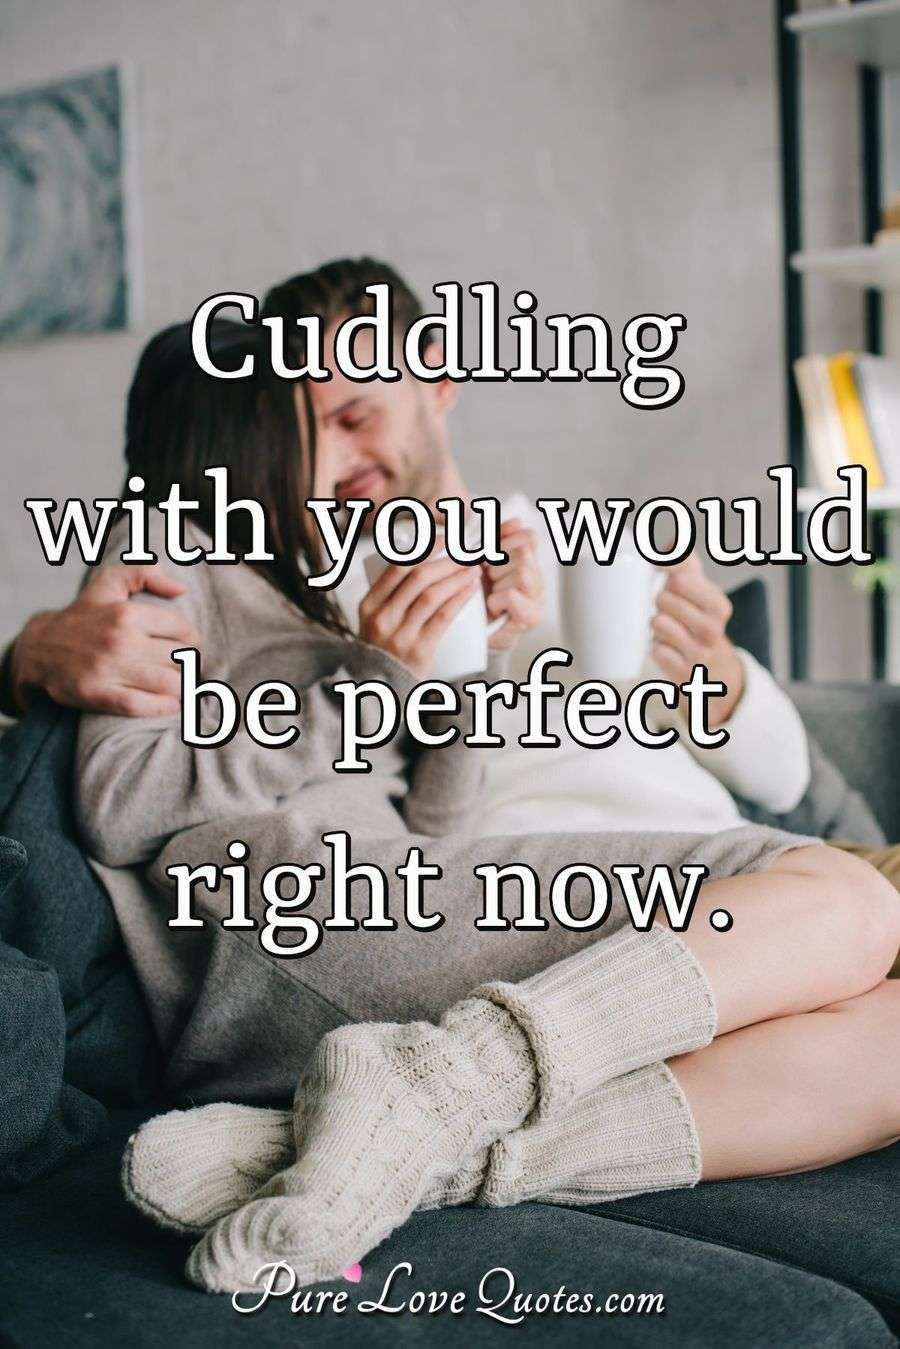 Cuddling With You Would Be Perfect Right Now Purelovequotes 